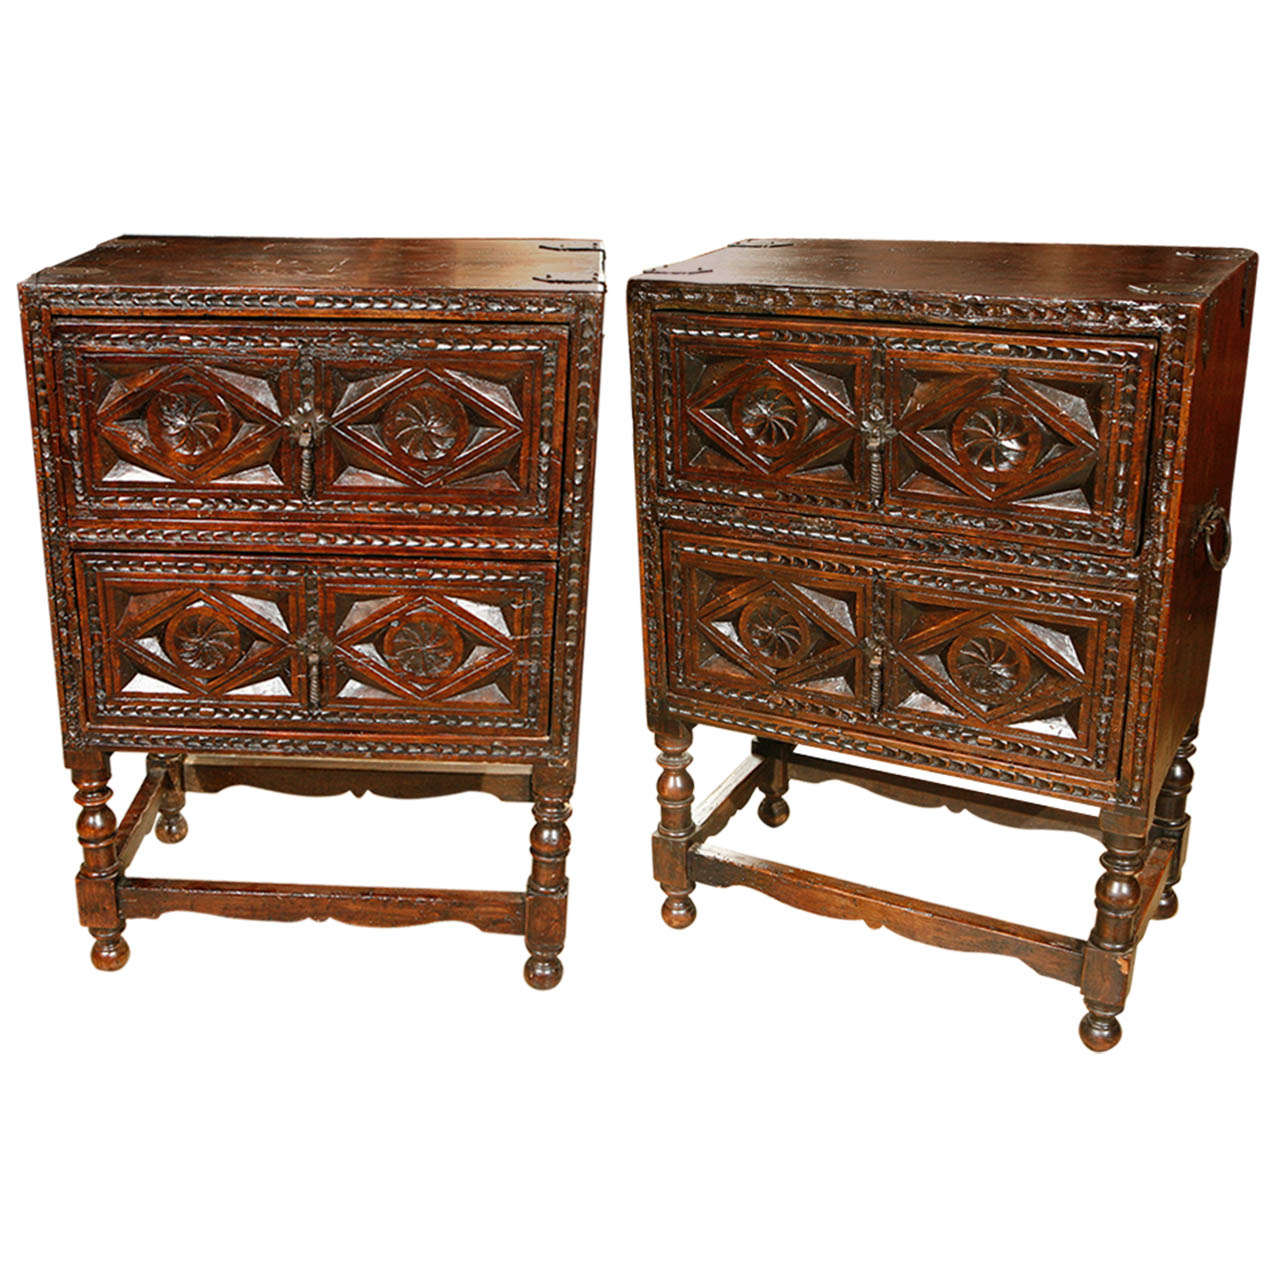 Pair of Low French Chests